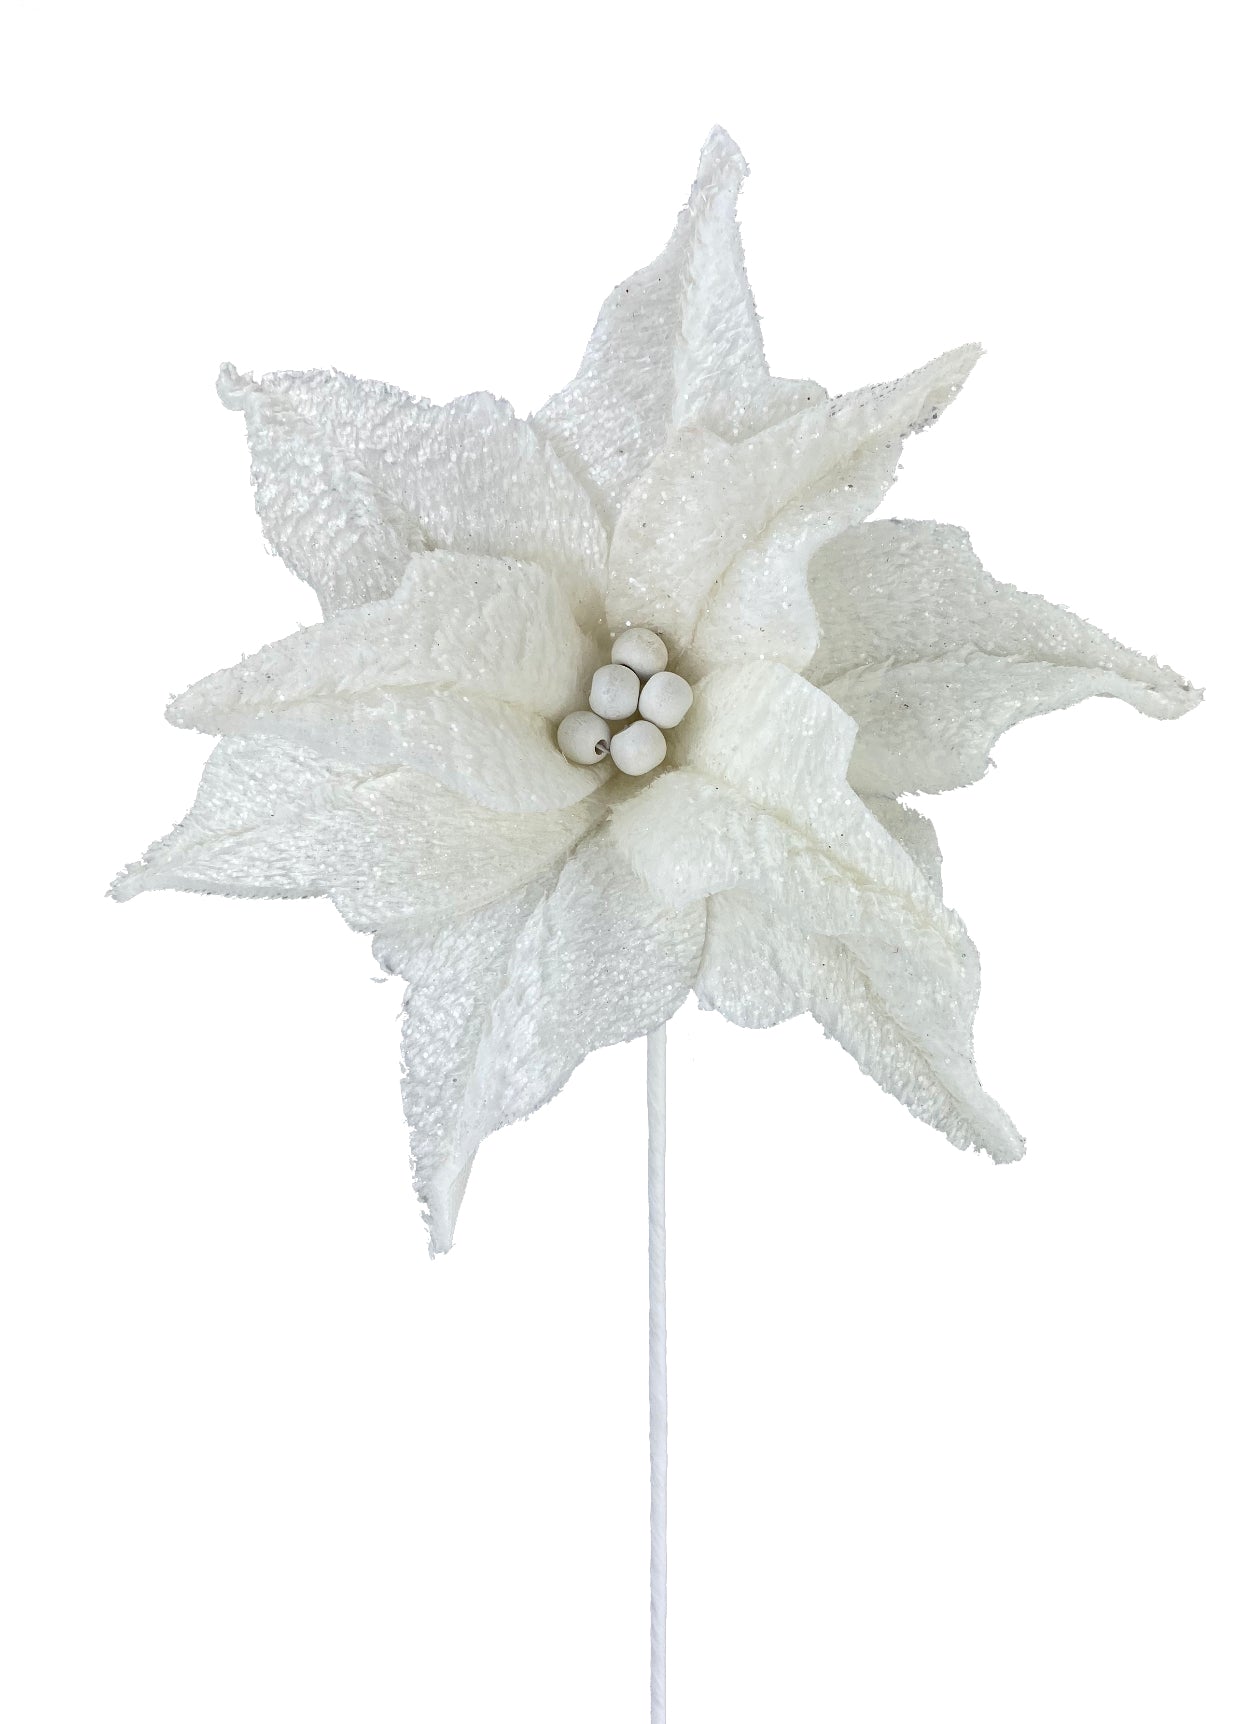 White fluffy poinsettias with wood beads - Greenery Marketartificial flowers85634WT